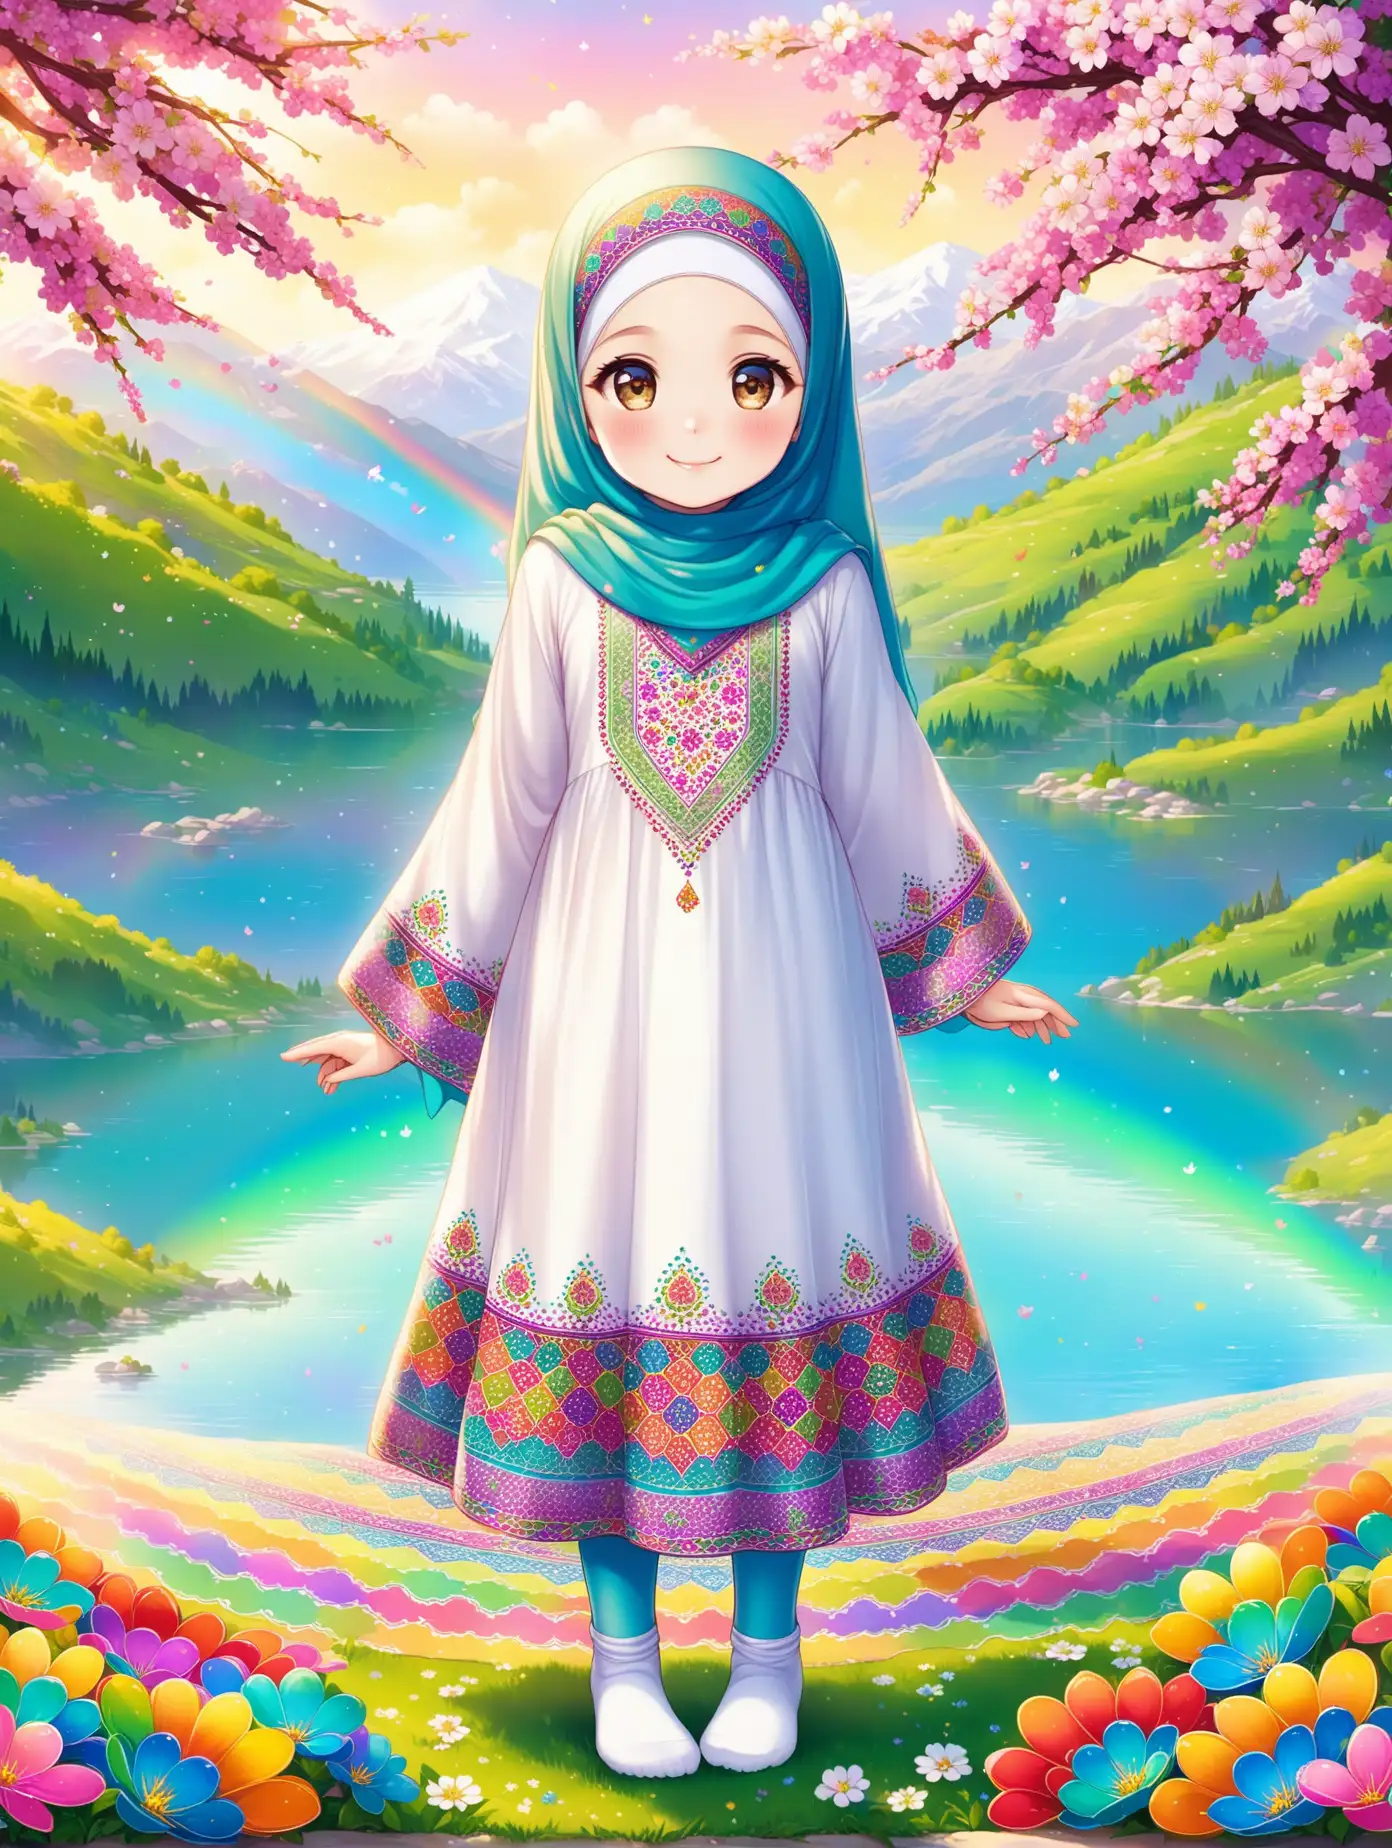 Persian little girl(full height, Muslim, with emphasis no hair nor neck out of veil(Hijab), white skin, cute, smiling, wearing socks, clothes full of Persian designs).
Atmosphere full of many rainbow flowers, lake, spring.